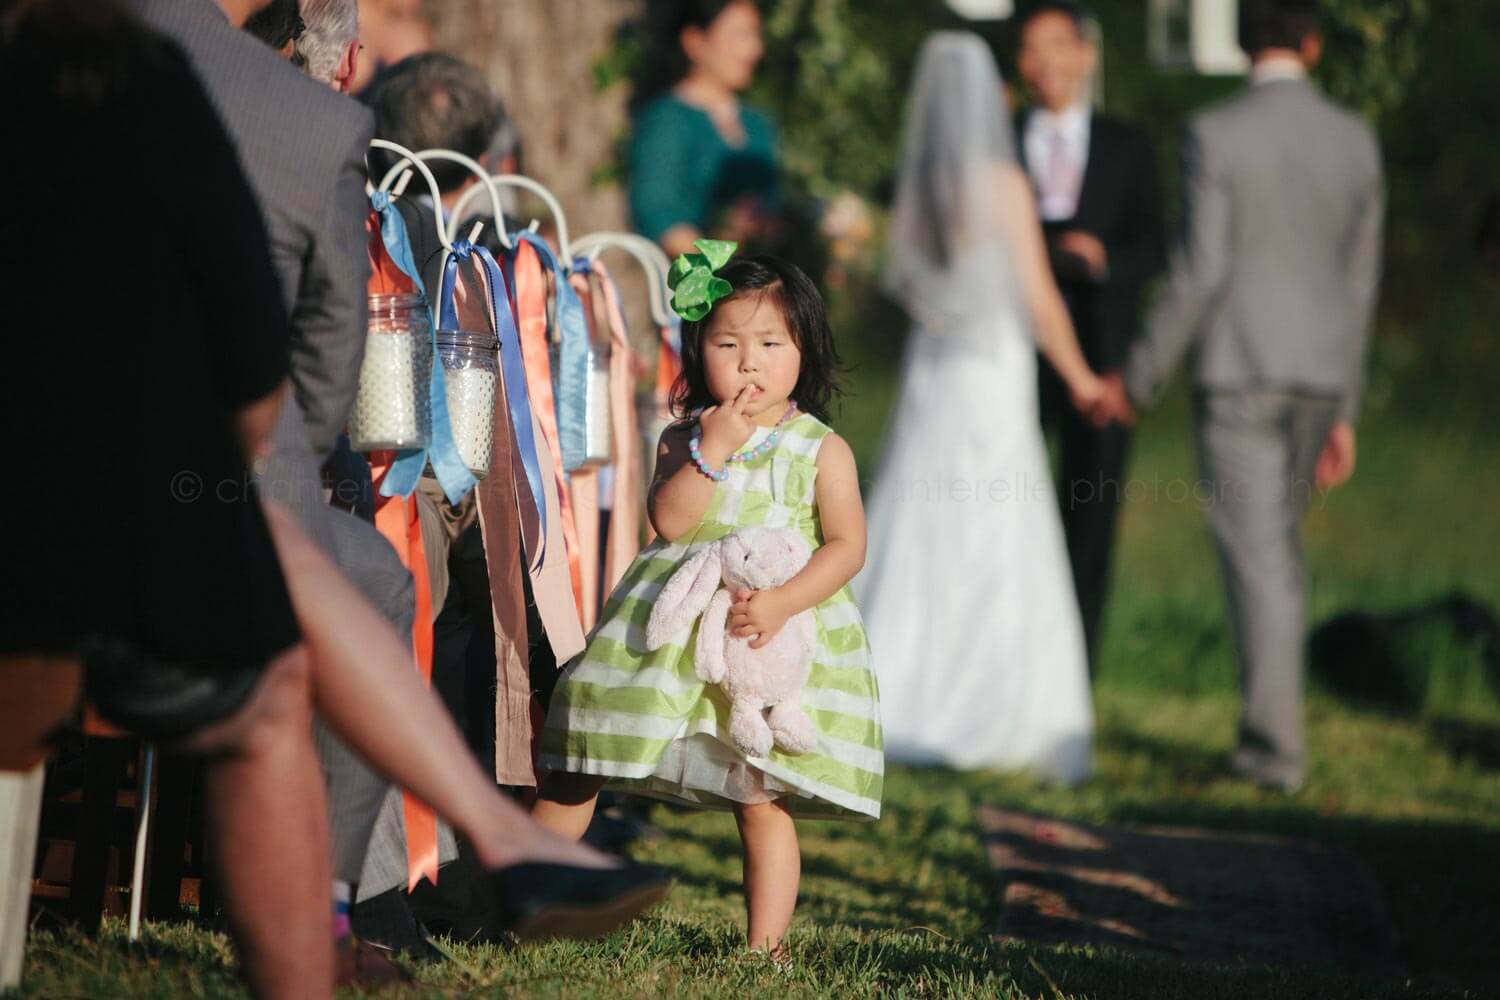 child wedding guest stands in aisle and flips bird